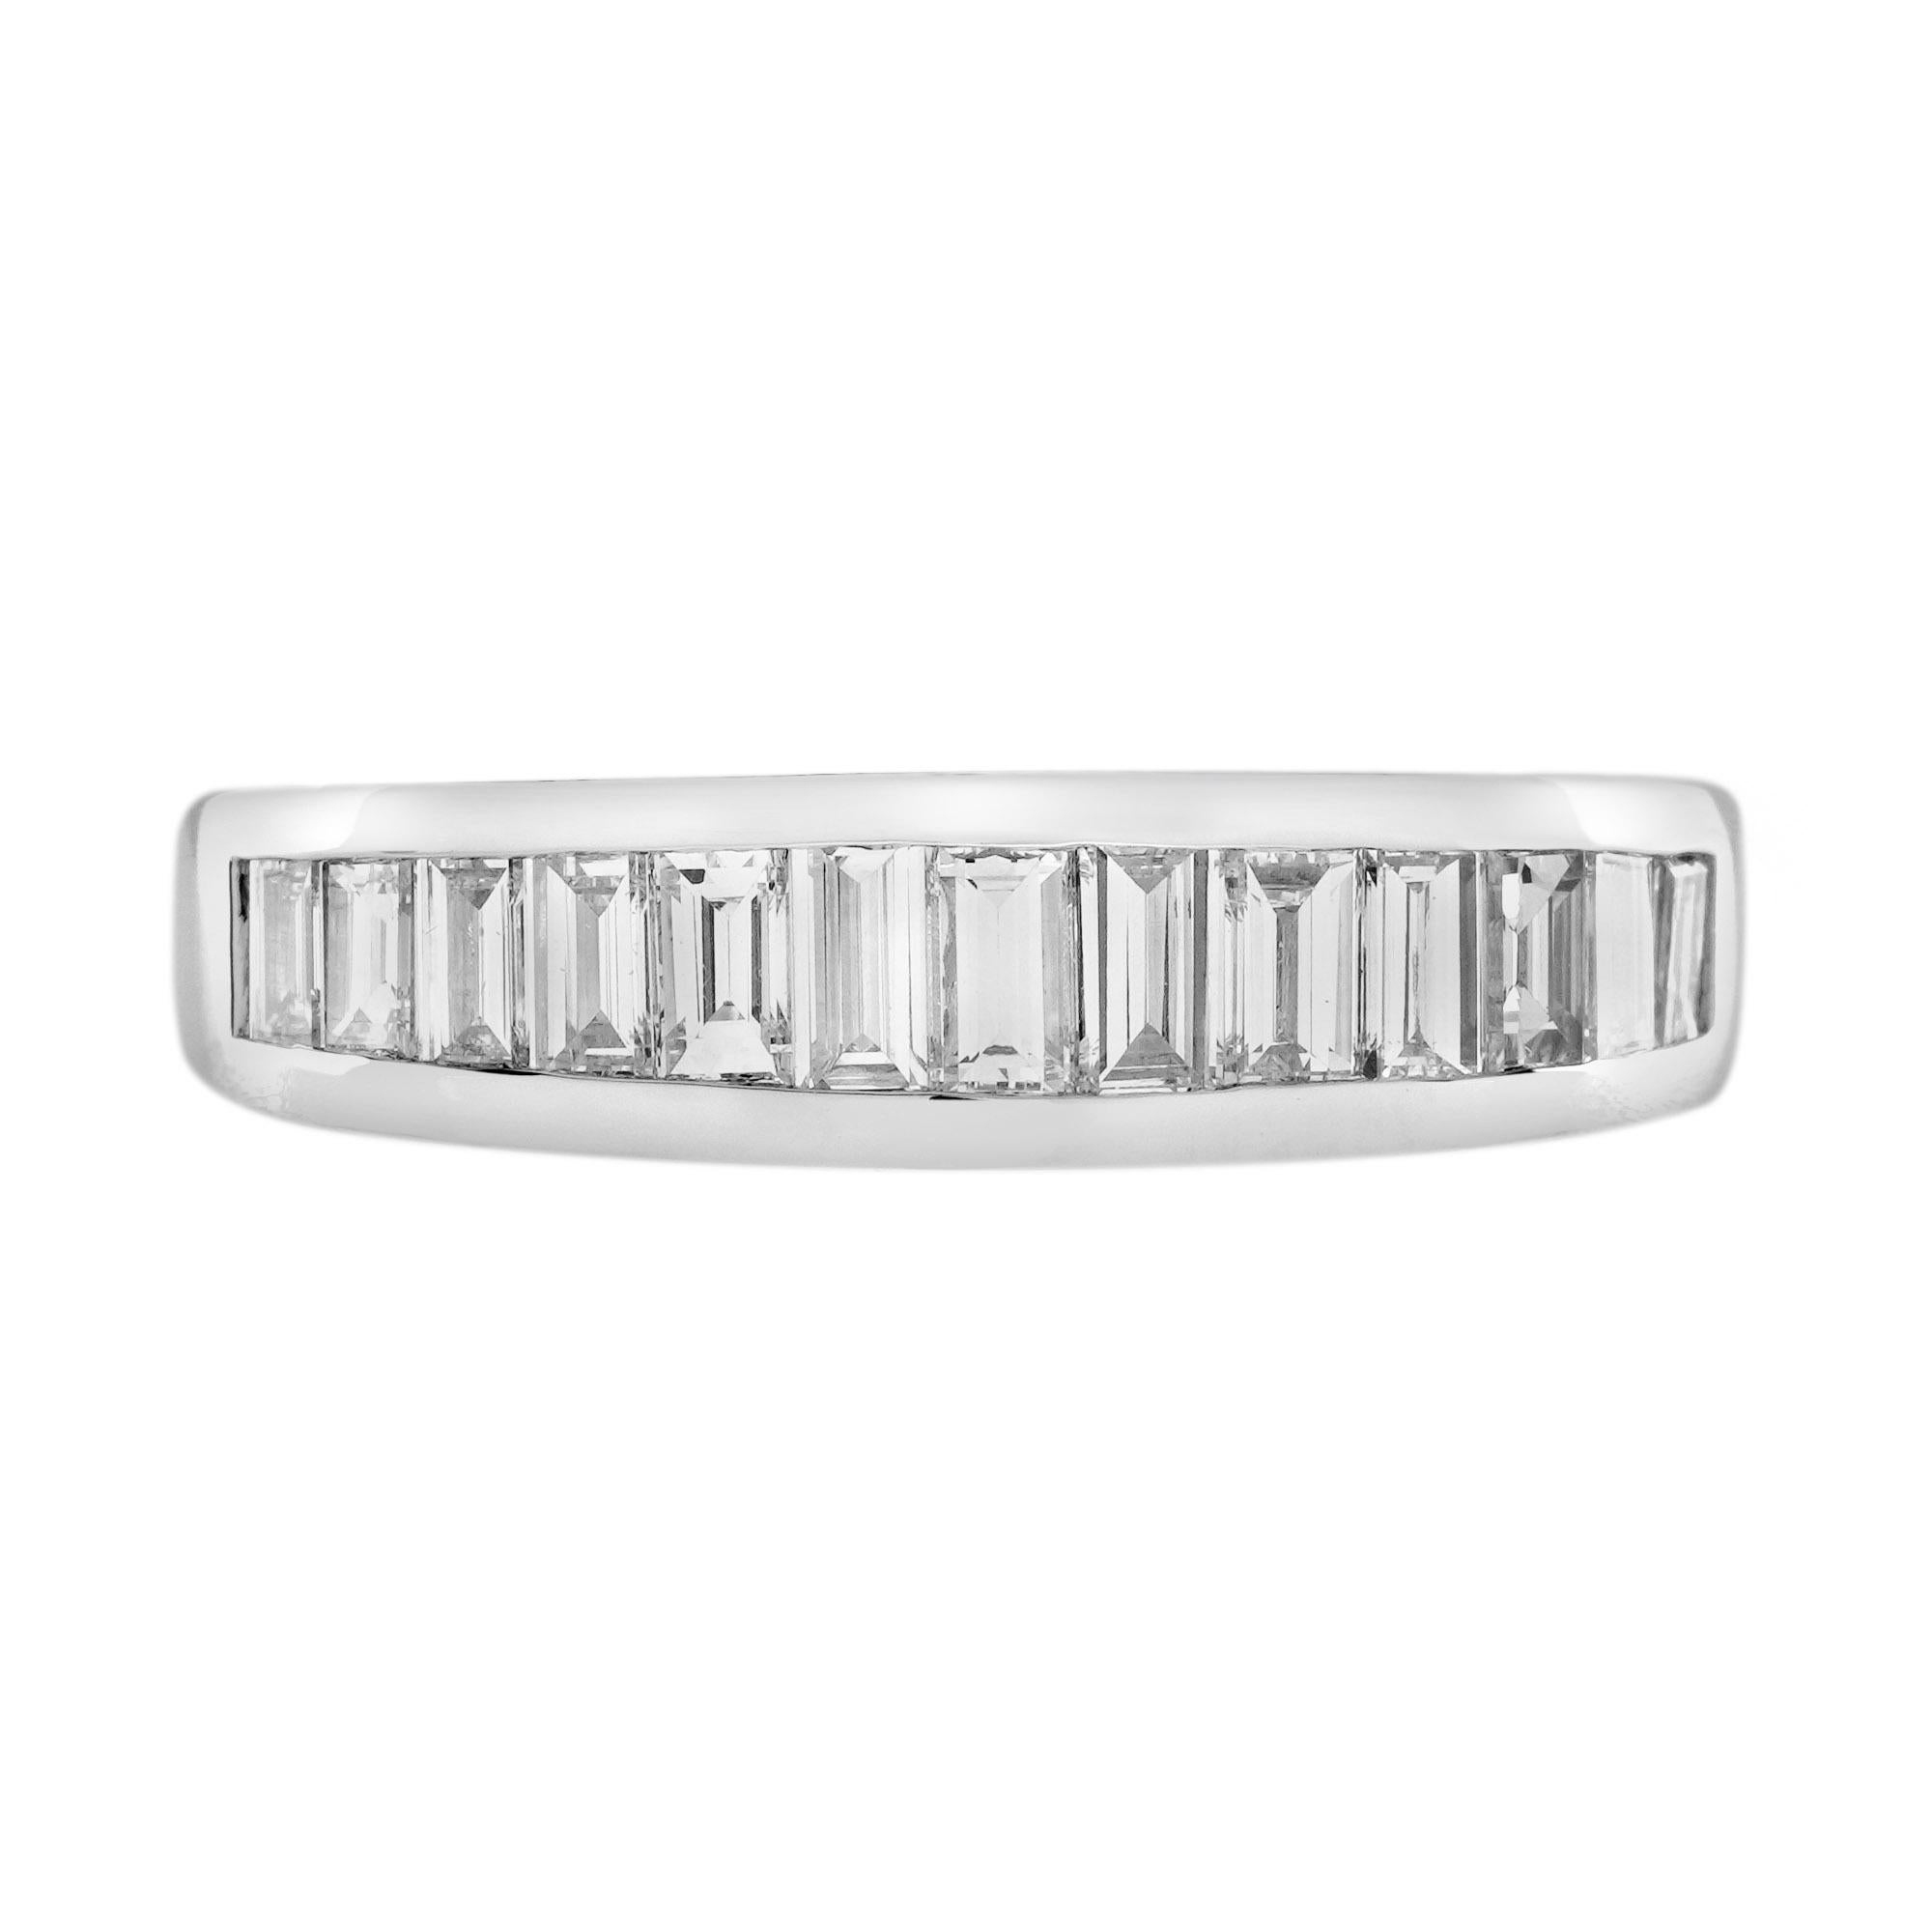 Women's Baguette Diamond Channel Set Classic Style Wedding Band Ring in Platinum 950 For Sale